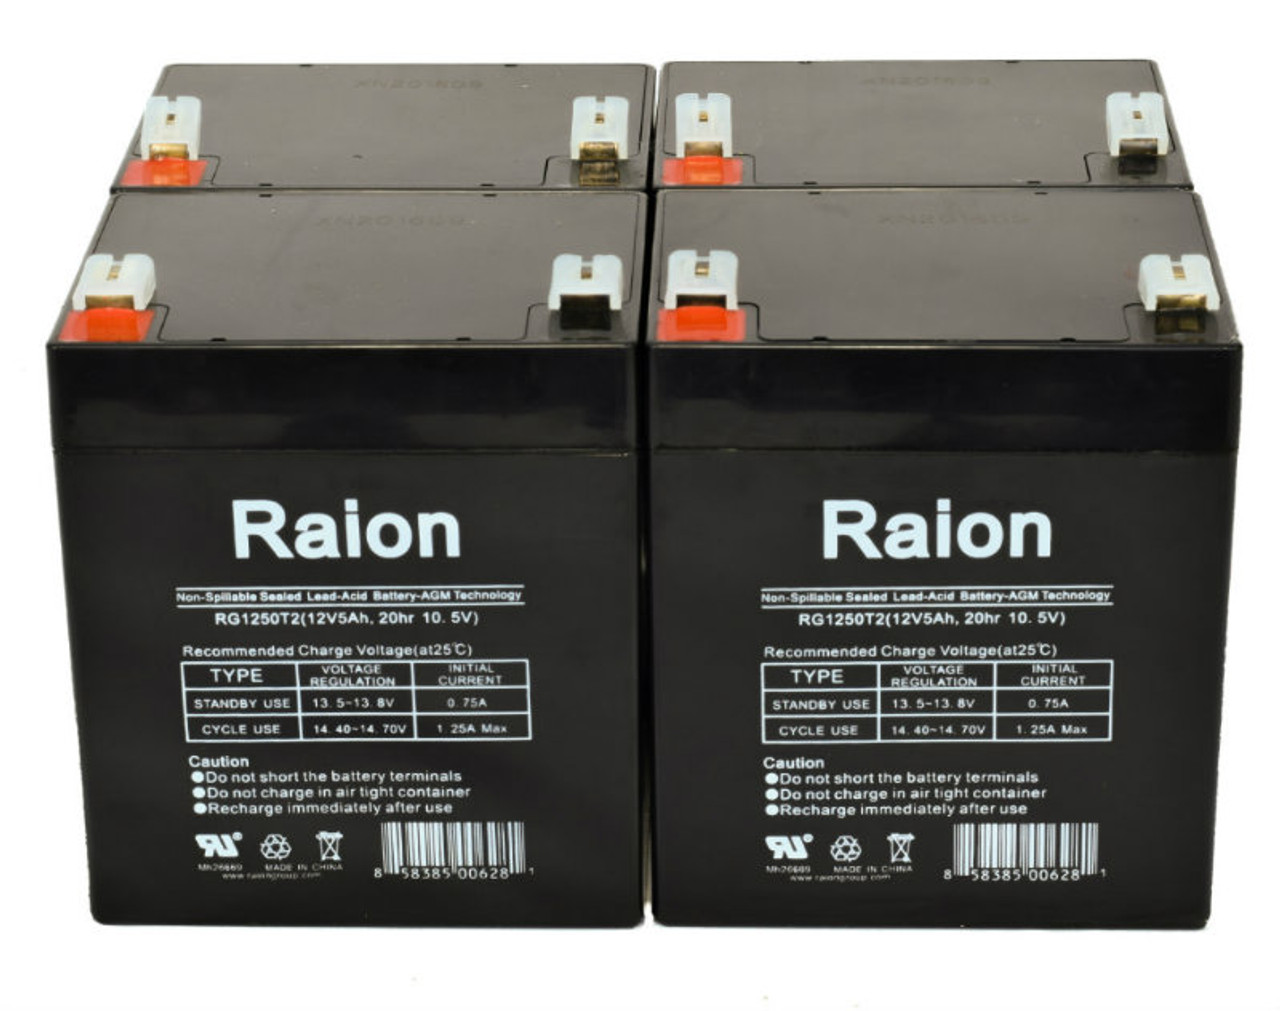 Raion Power 12V 5Ah RG1250T2 Replacement Lead Acid Battery for Delta DTM 1205 - 4 Pack